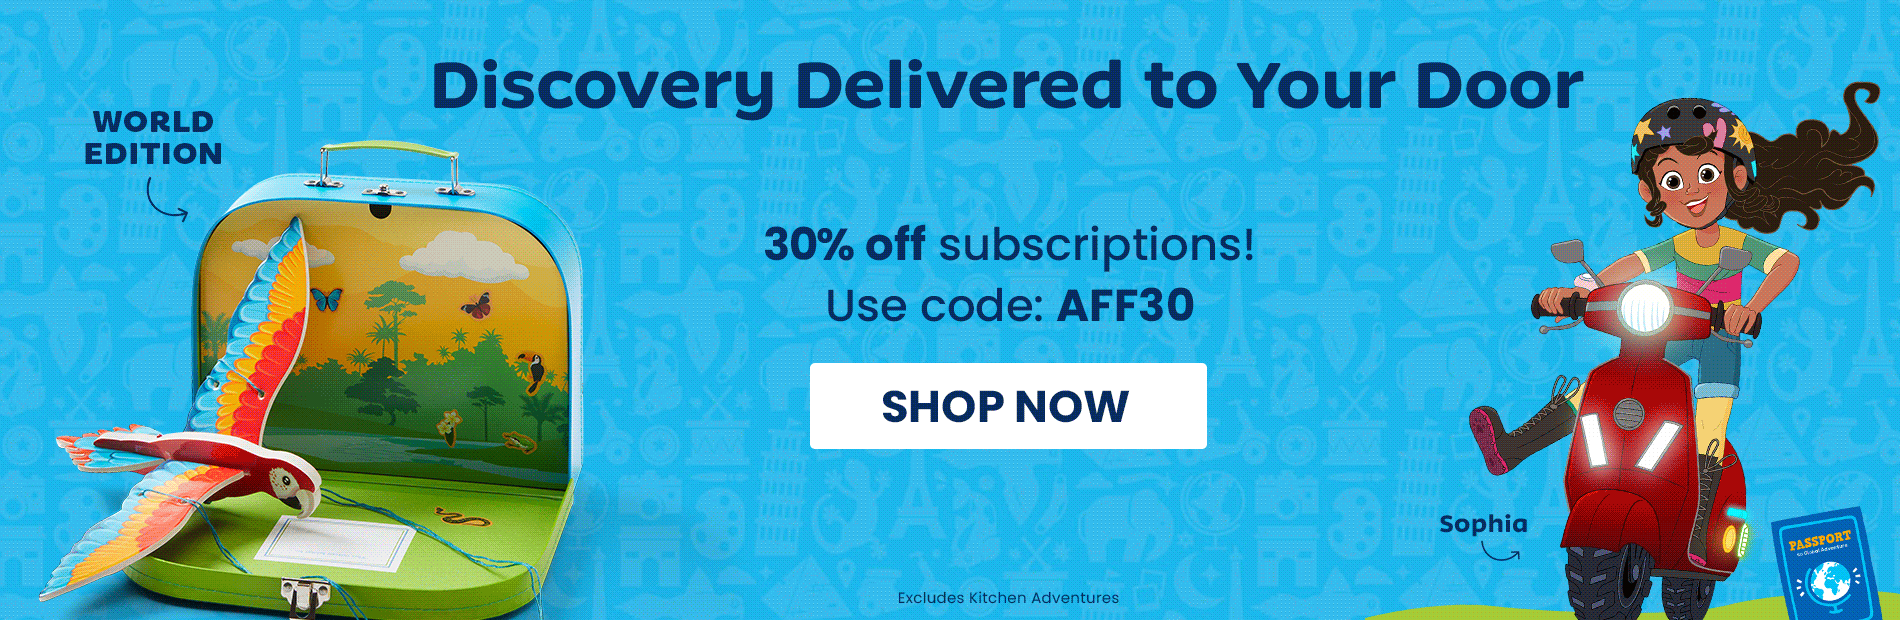 Discovery Delivered to Your Door 30% off subscriptions! Use code: AFF30 SHOP NOW Excludes Kitchen Adventures